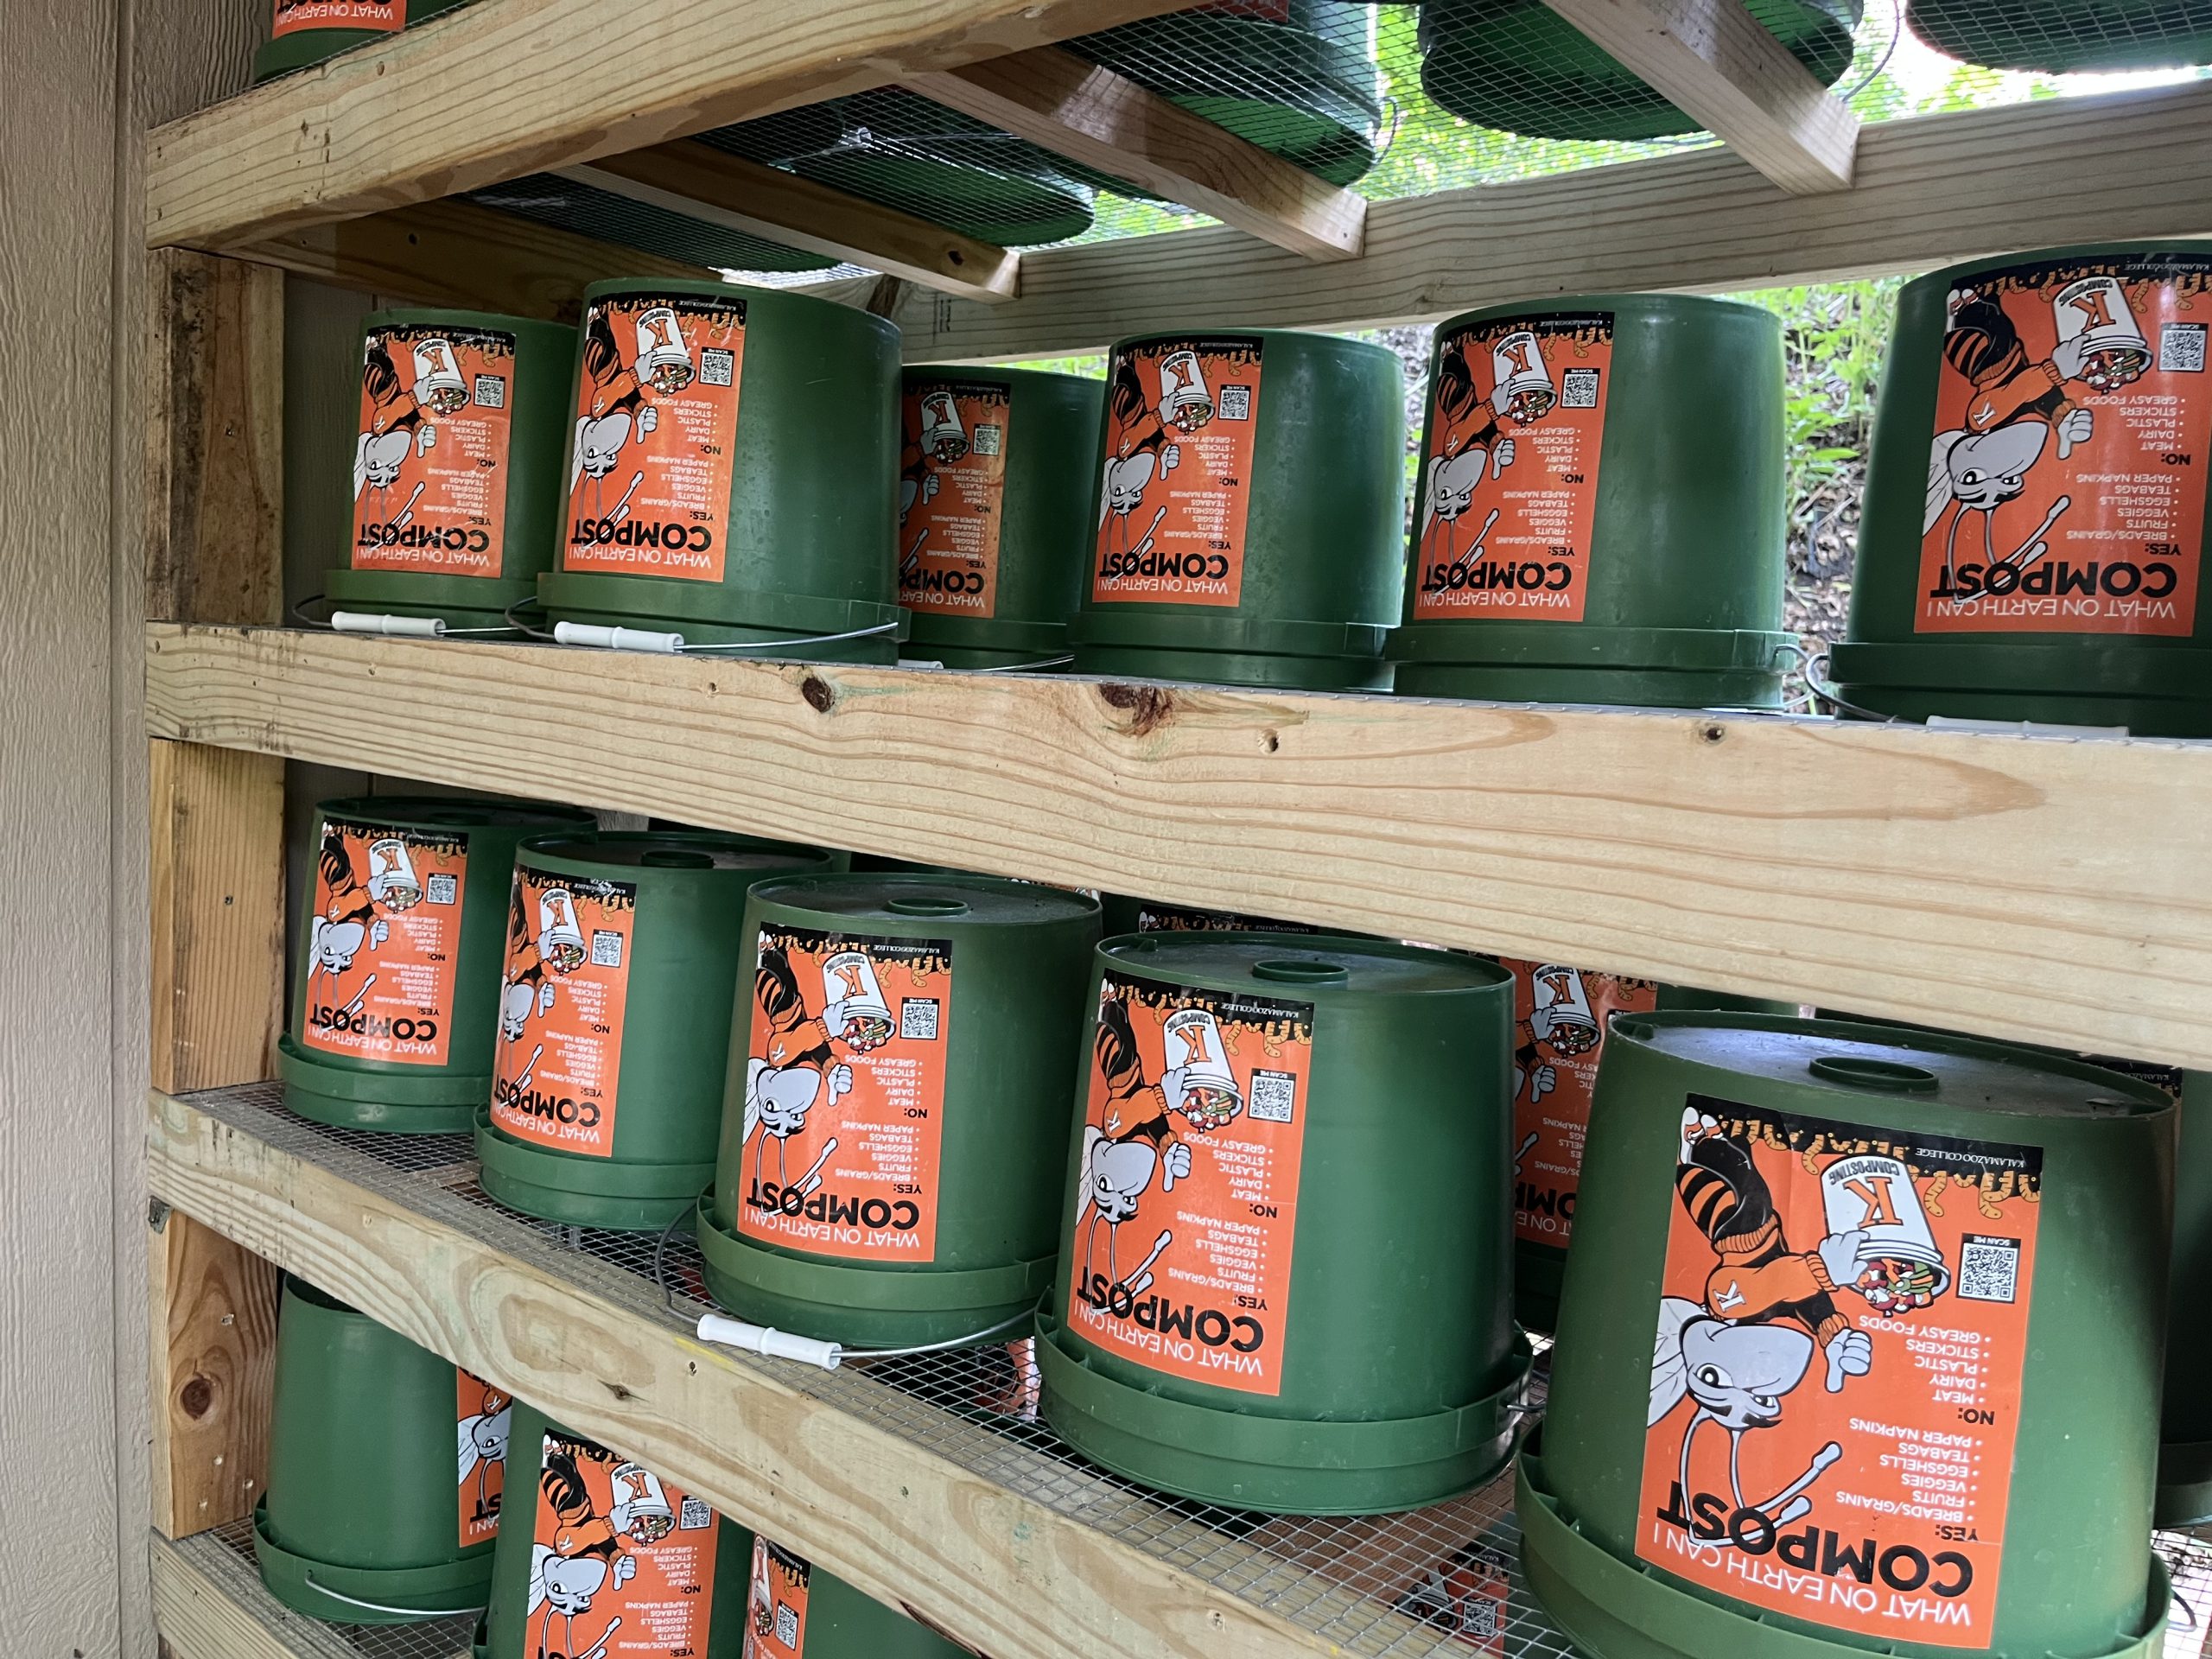 Close up of green buckets upside down with orange labels on shelves